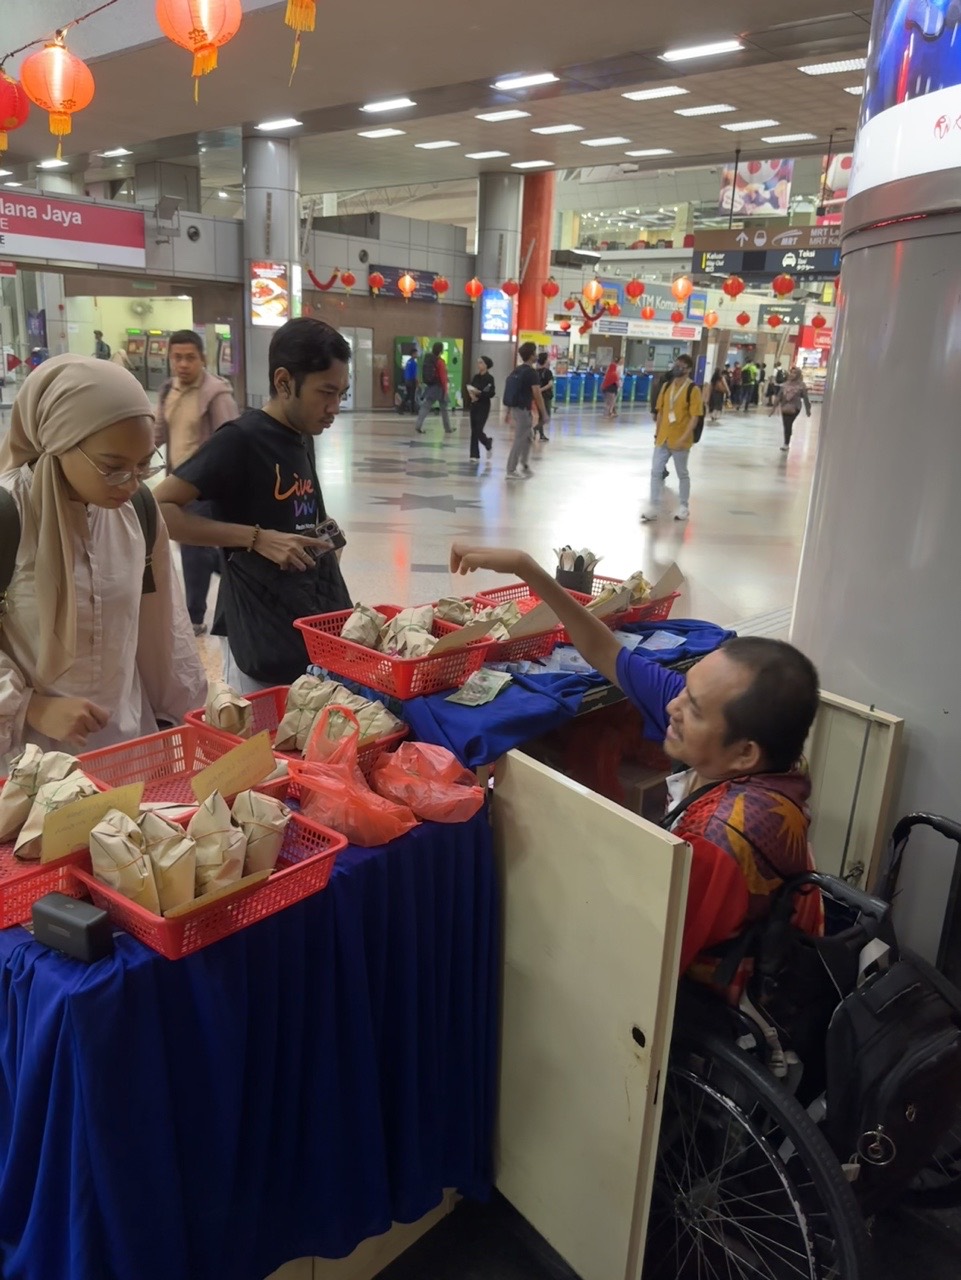 Mohd selling nasi lemak to customers in a wheelchair